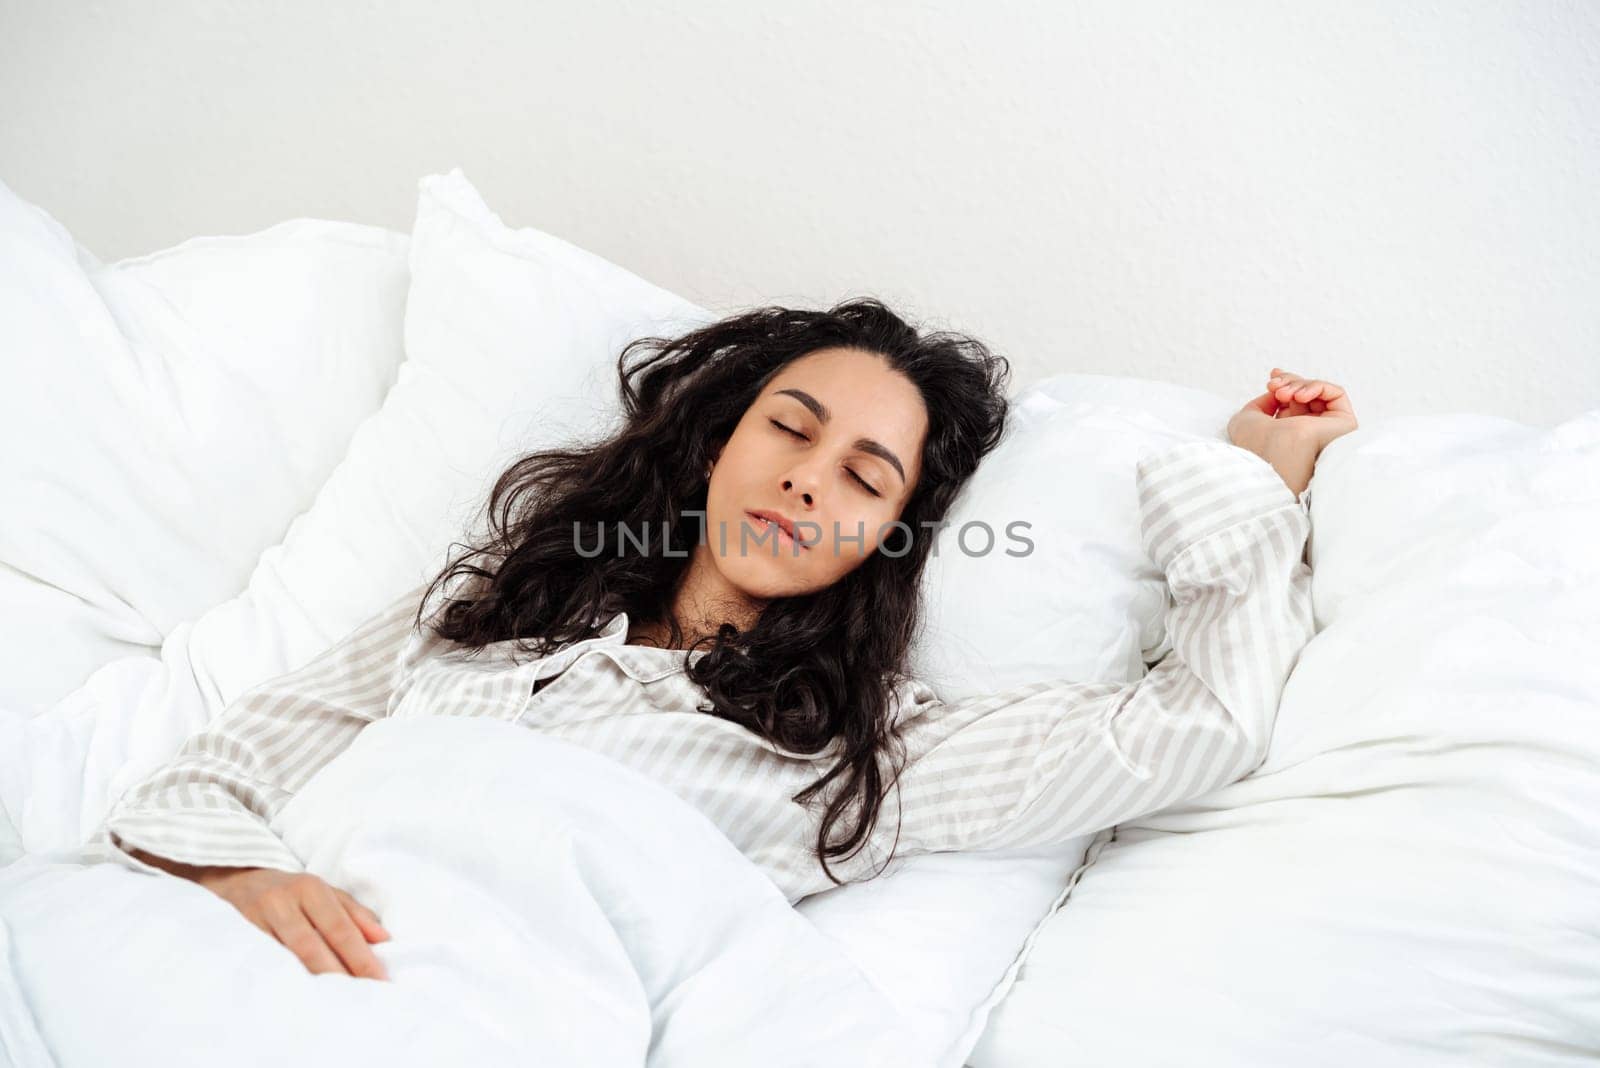 Peaceful serene beautiful young lady wear pajamas lying asleep relaxing sleeping in cozy white bed on soft pillow resting covered with blanket enjoying good healthy sleep concept, above top view